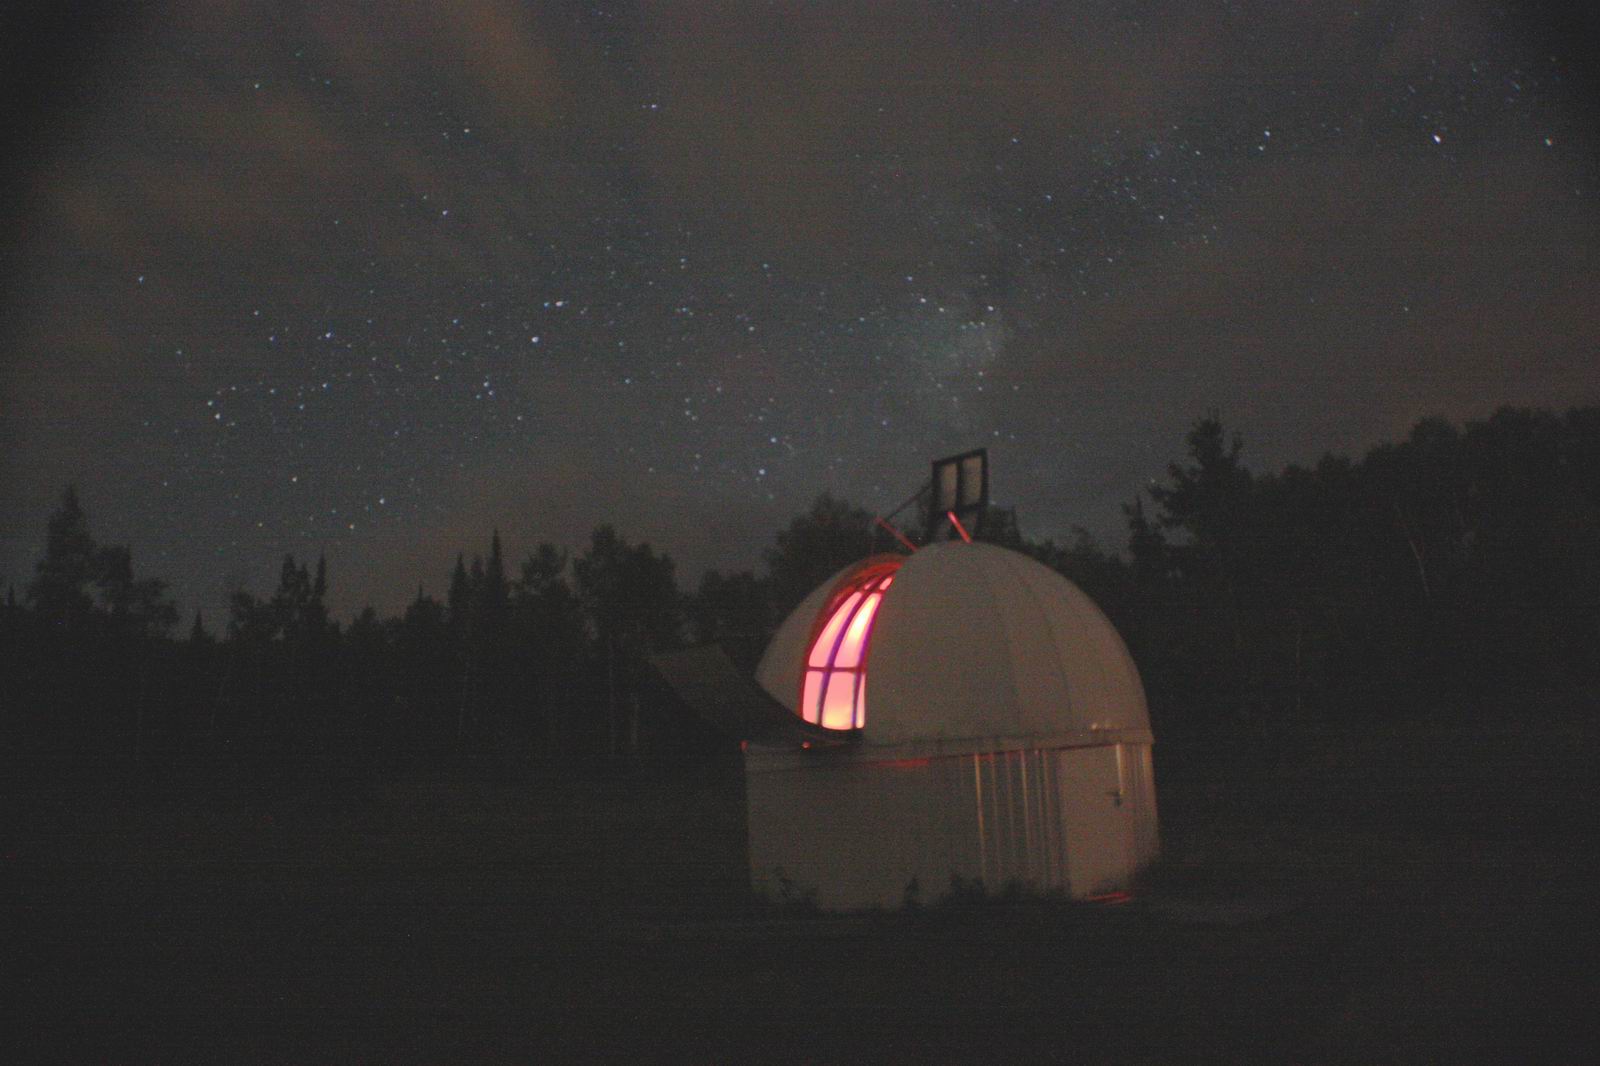 The David Thompson Observatory at night; a white metal dome-shaped building with a lit window at the top which exposes the telescope. There is a mist of stars in the night sky overhead and the dark silhouette of forest in the background.